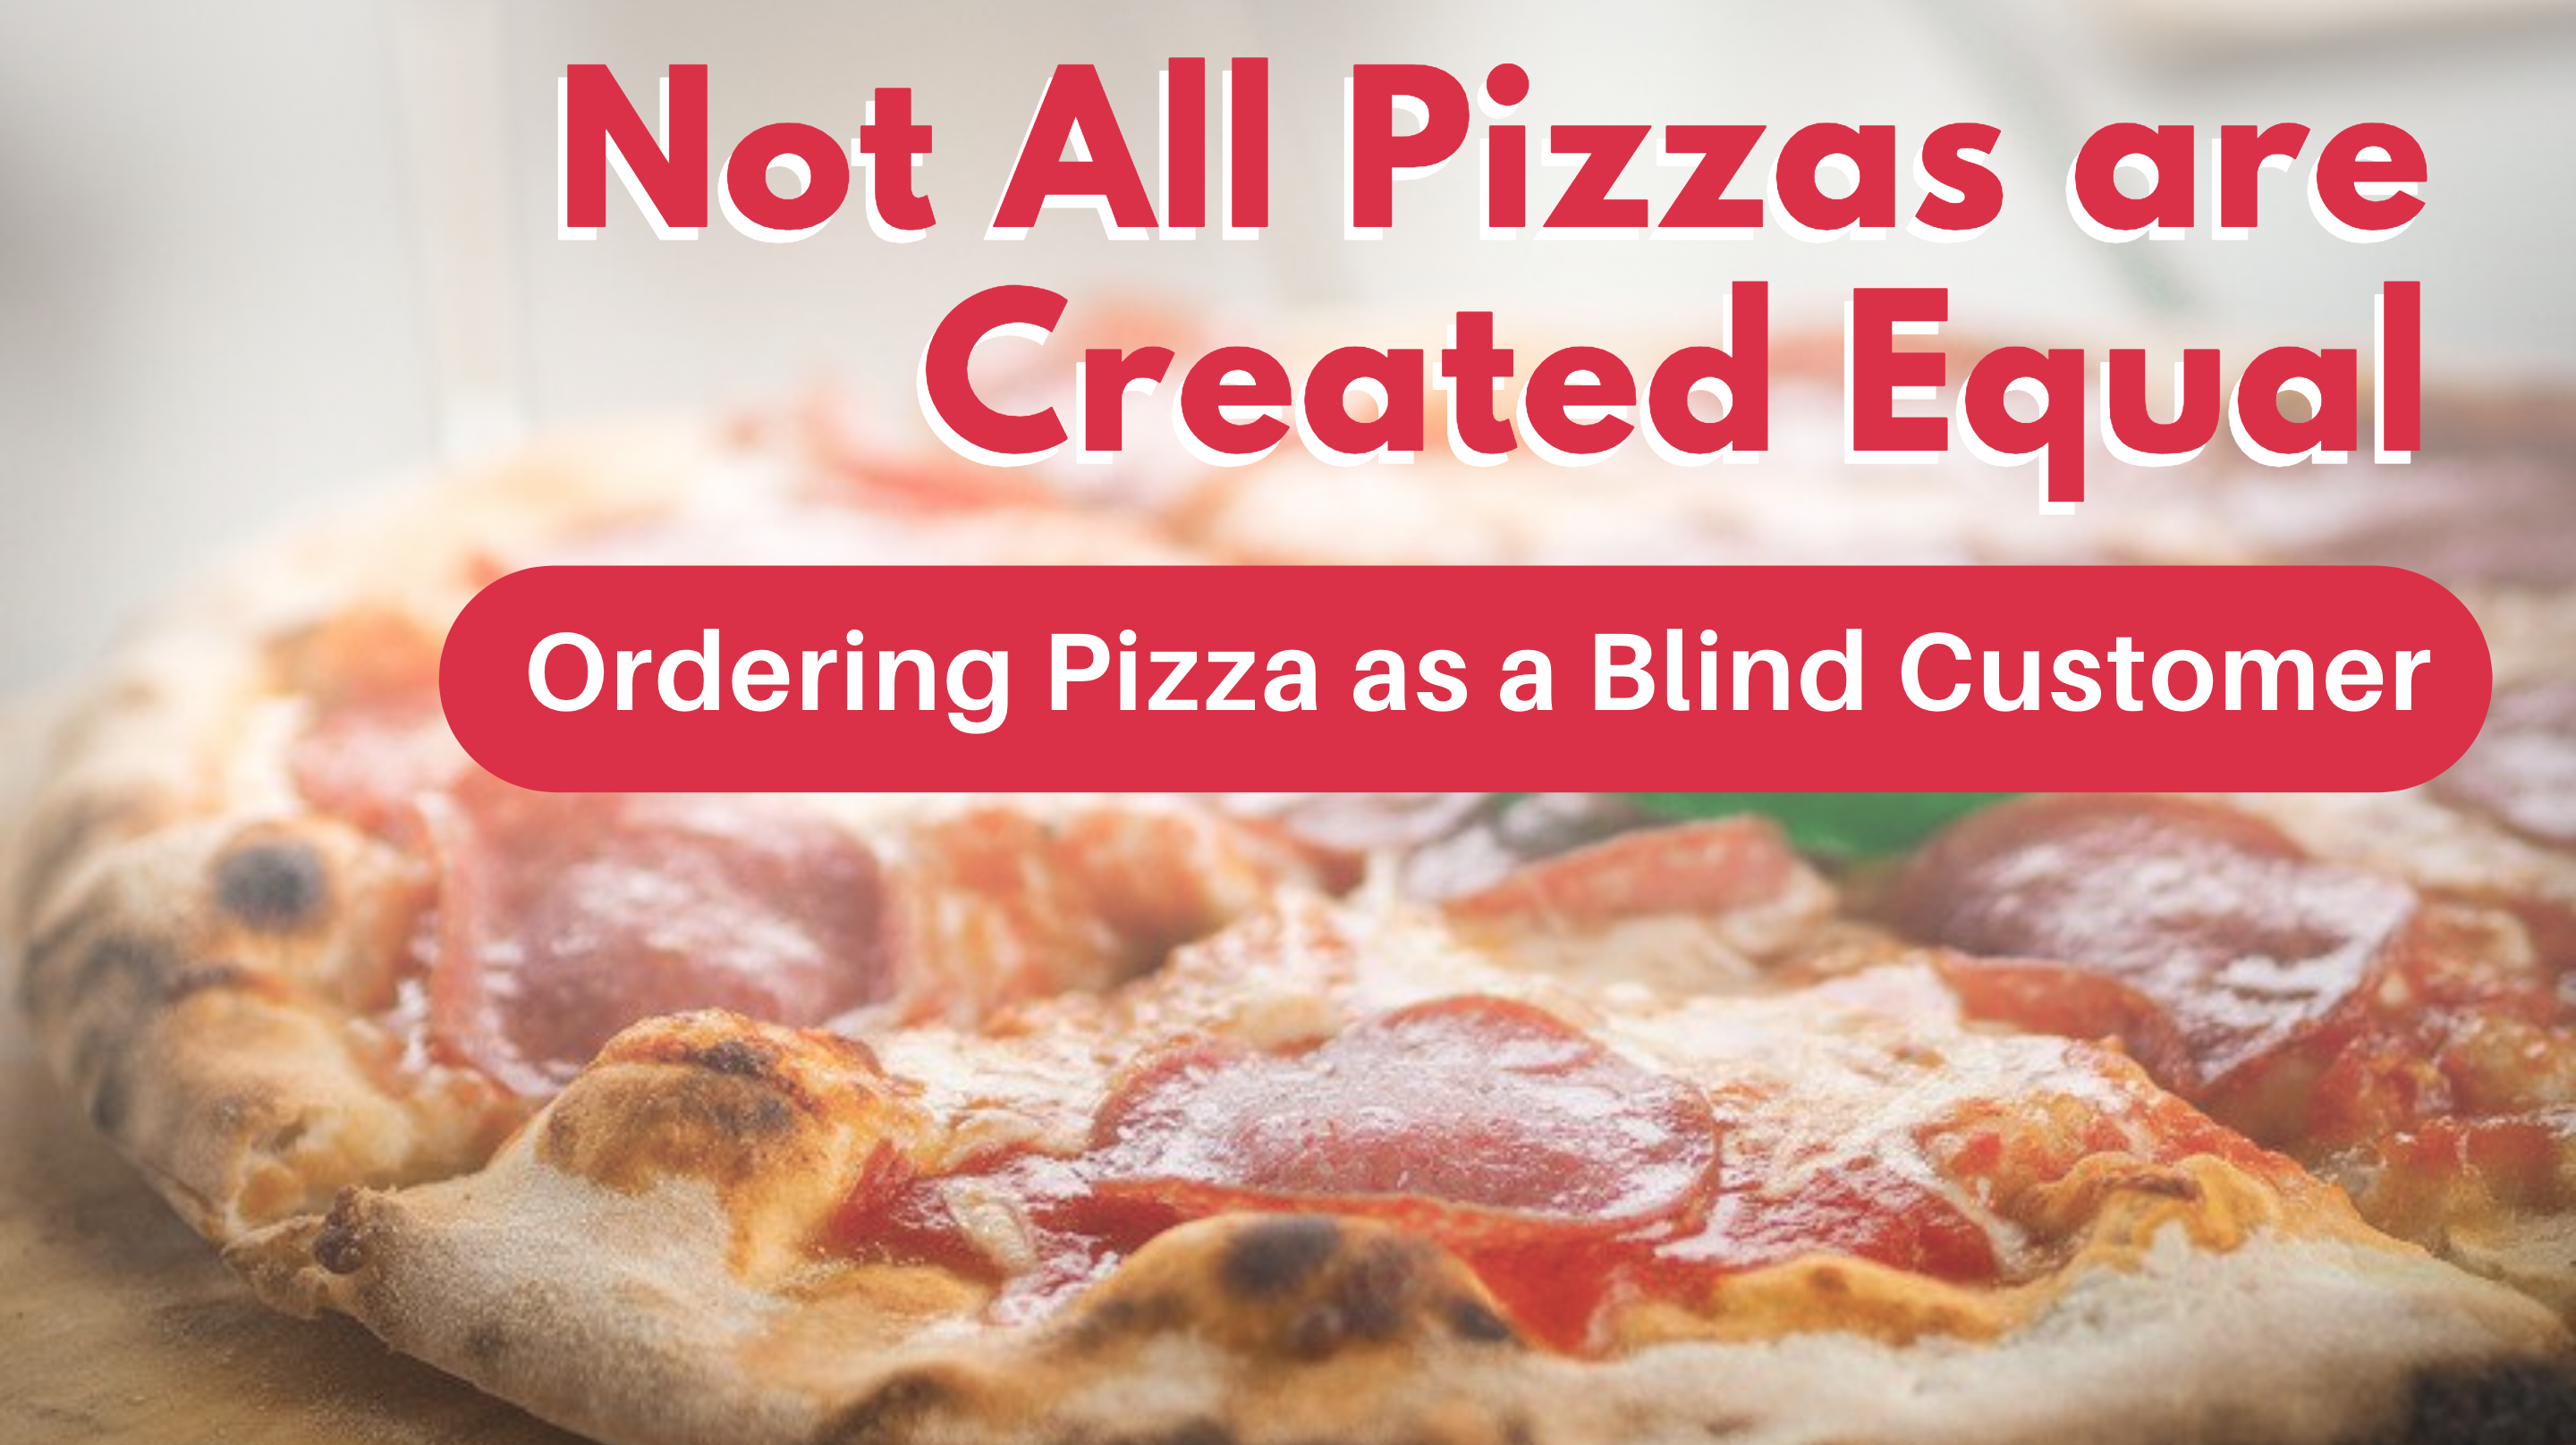 Not All Pizzas are Created Equal